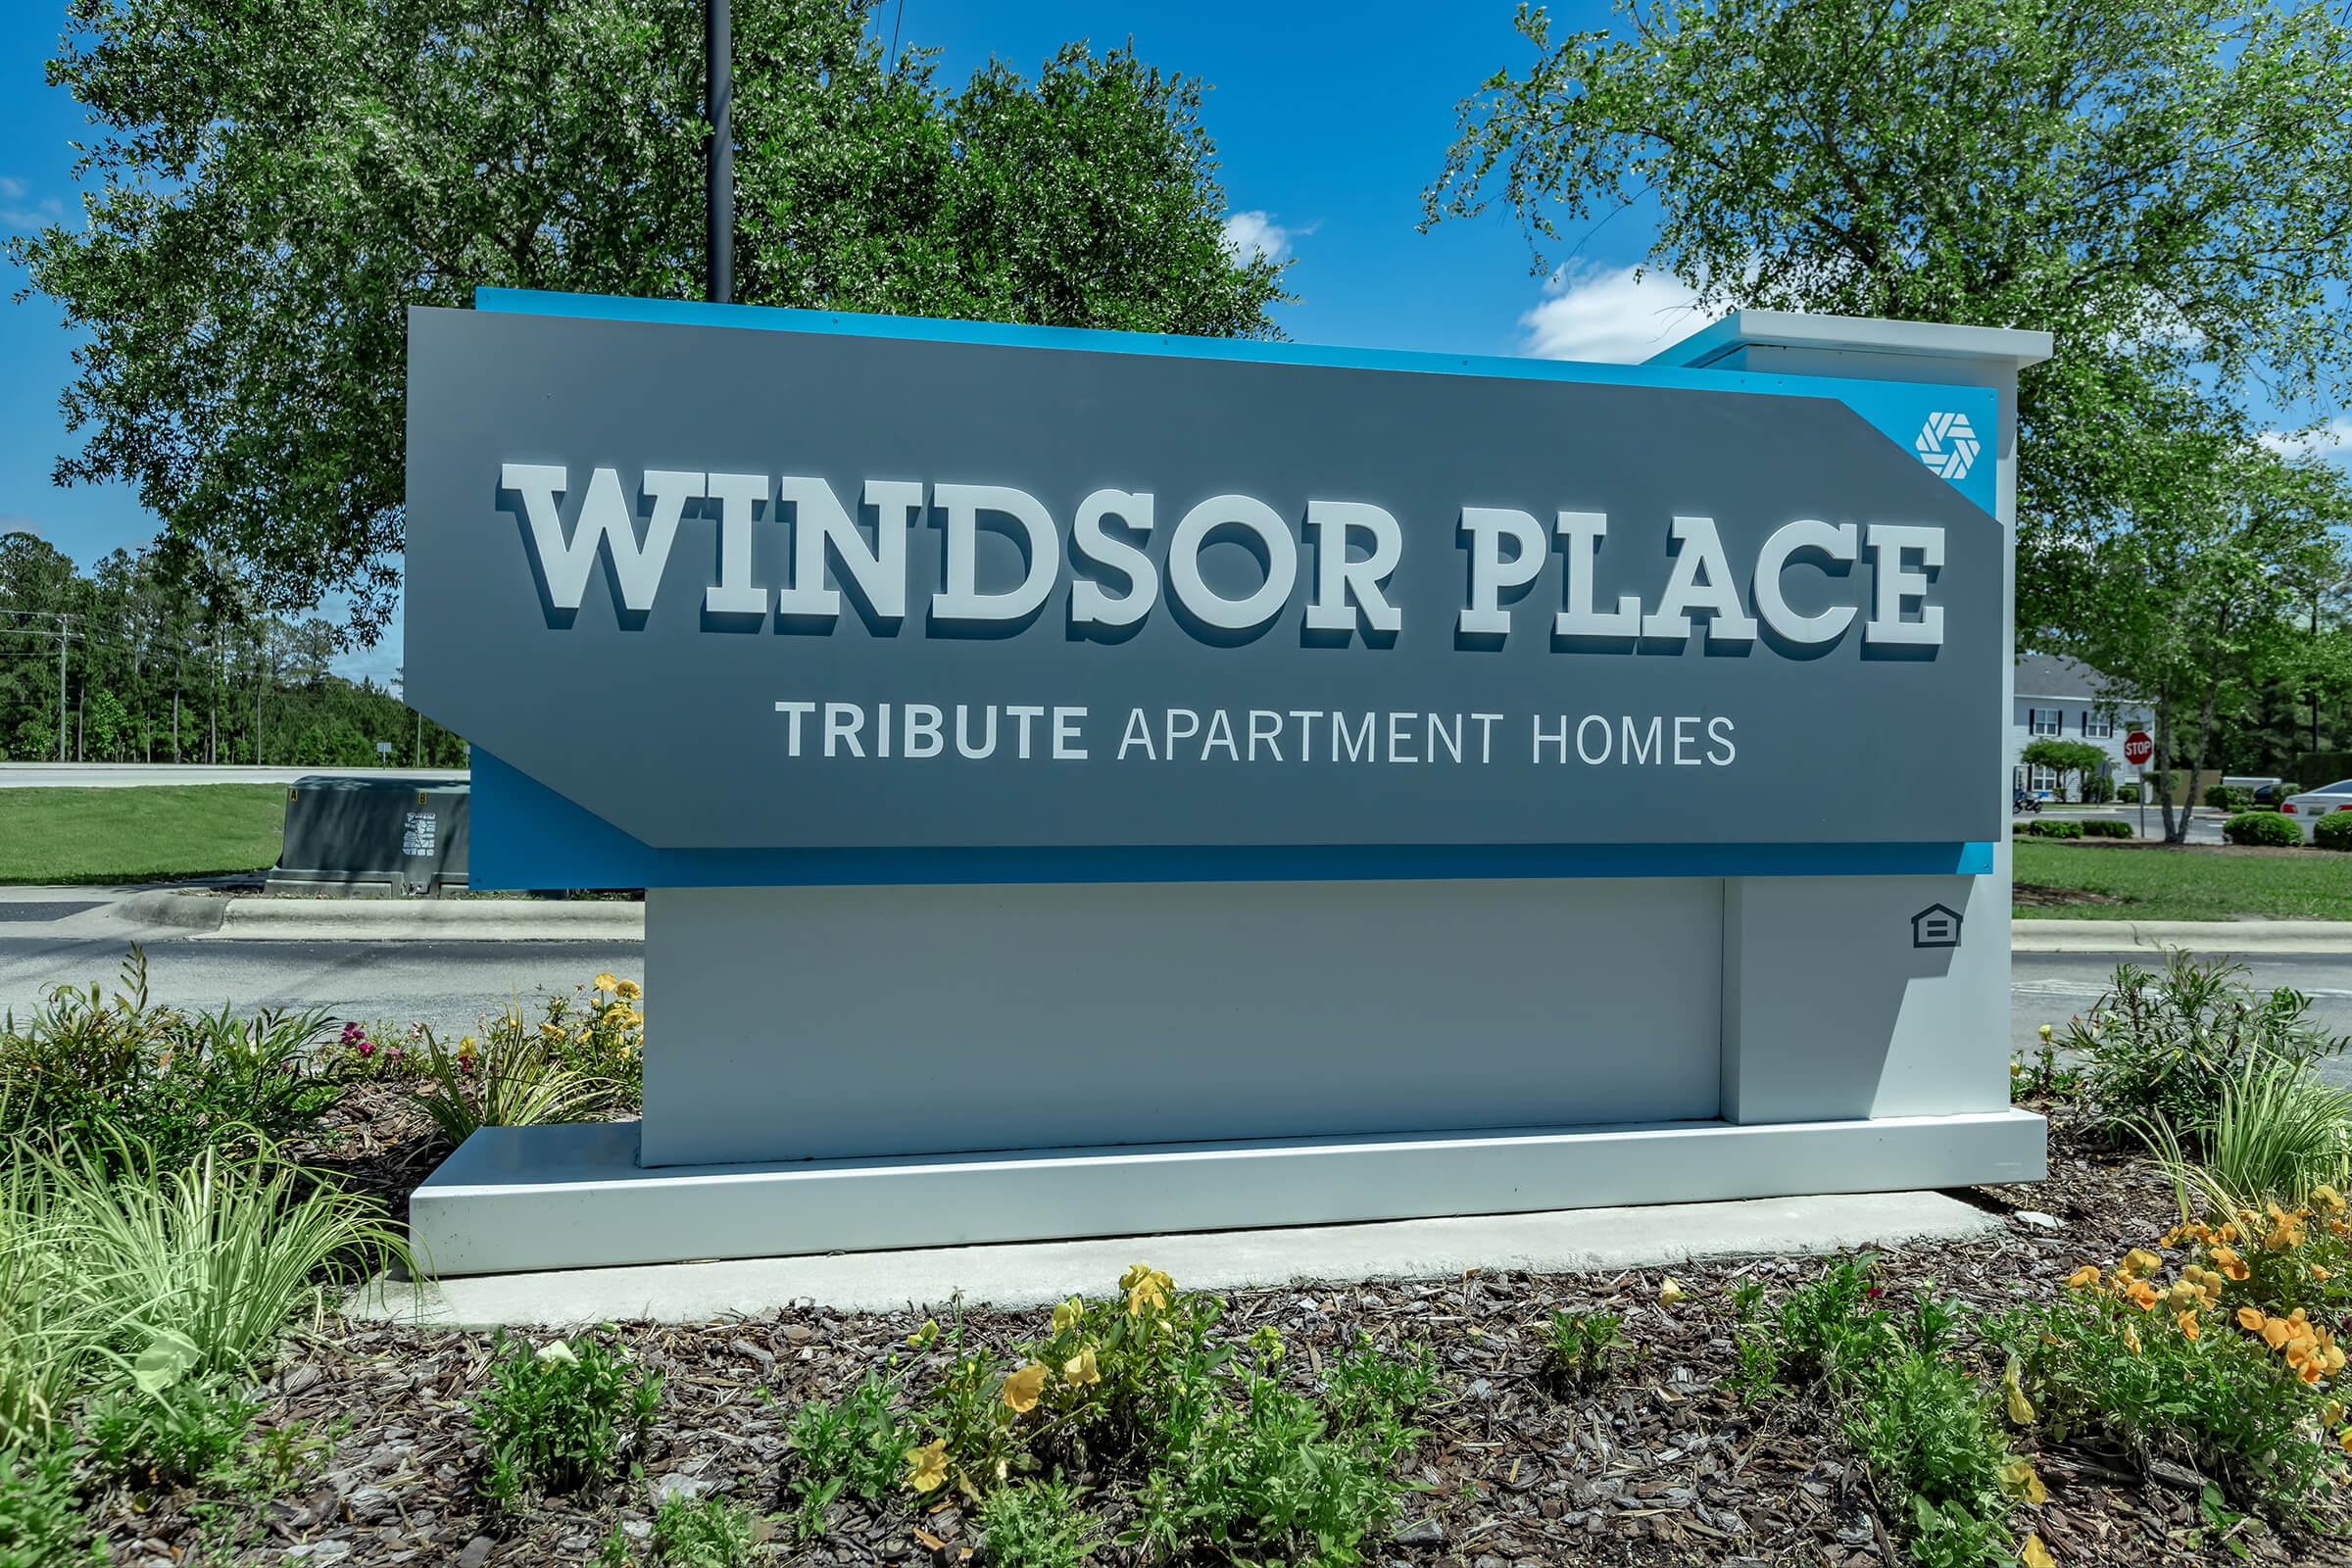 GIVE US A CALL TODAY TO MAKE WINDSOR PLACE YOUR NEW HOME